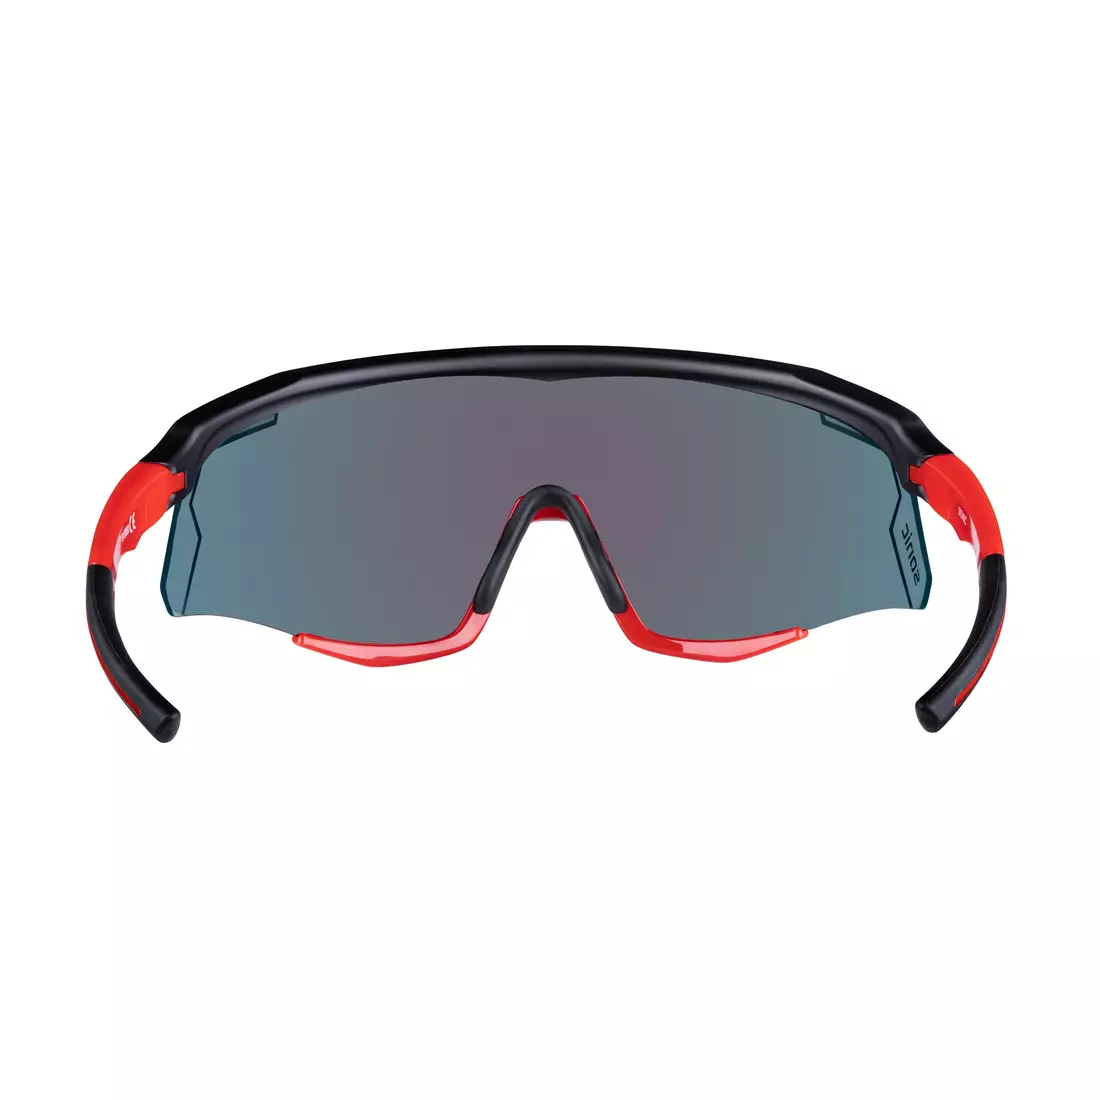 FORCE cycling / sports glasses SONIC, black and red, 910950